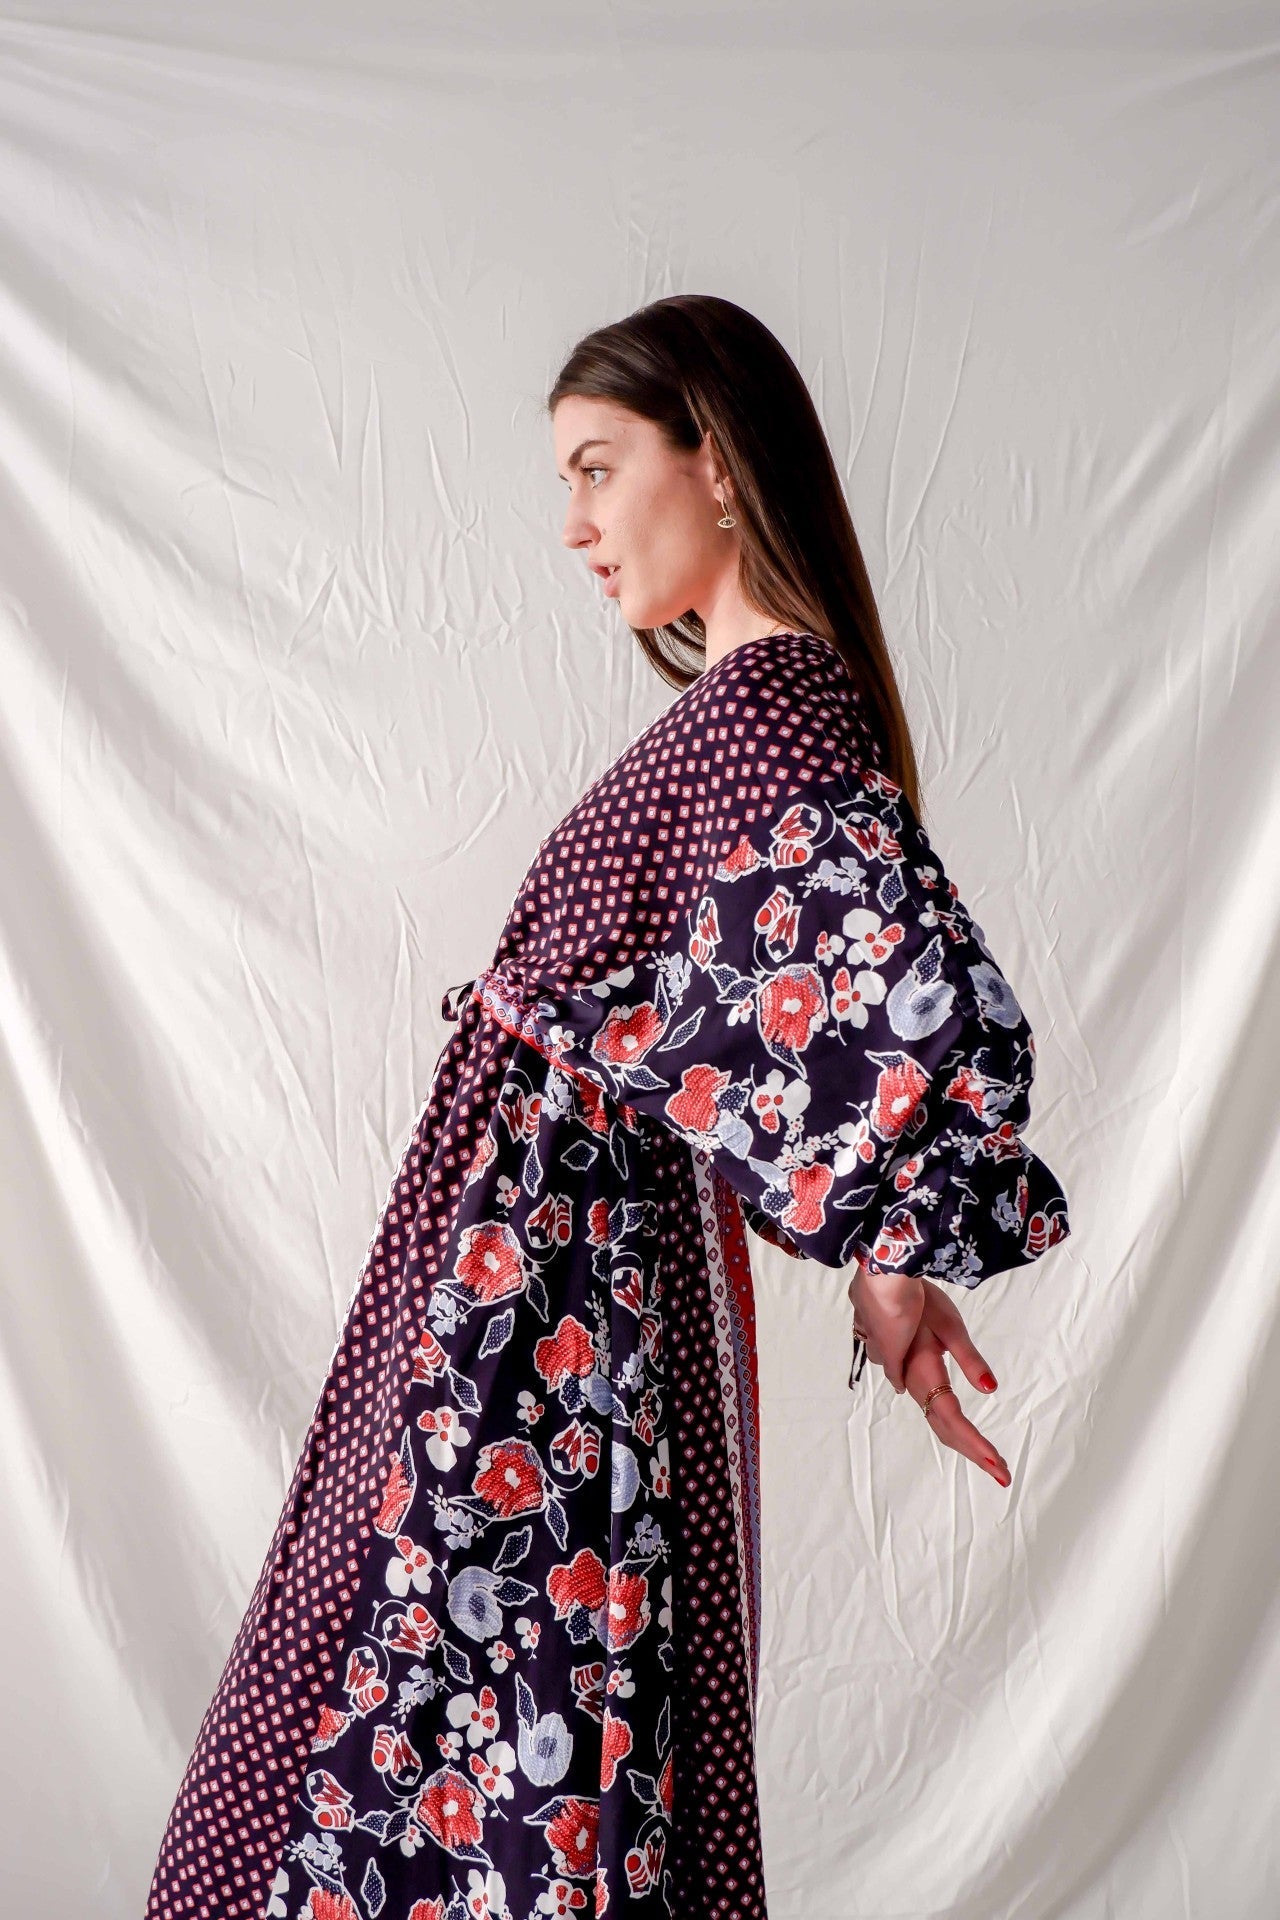 Made to measure floral printed maxi kaftan dress with puffy sleeves - Bastet Noir